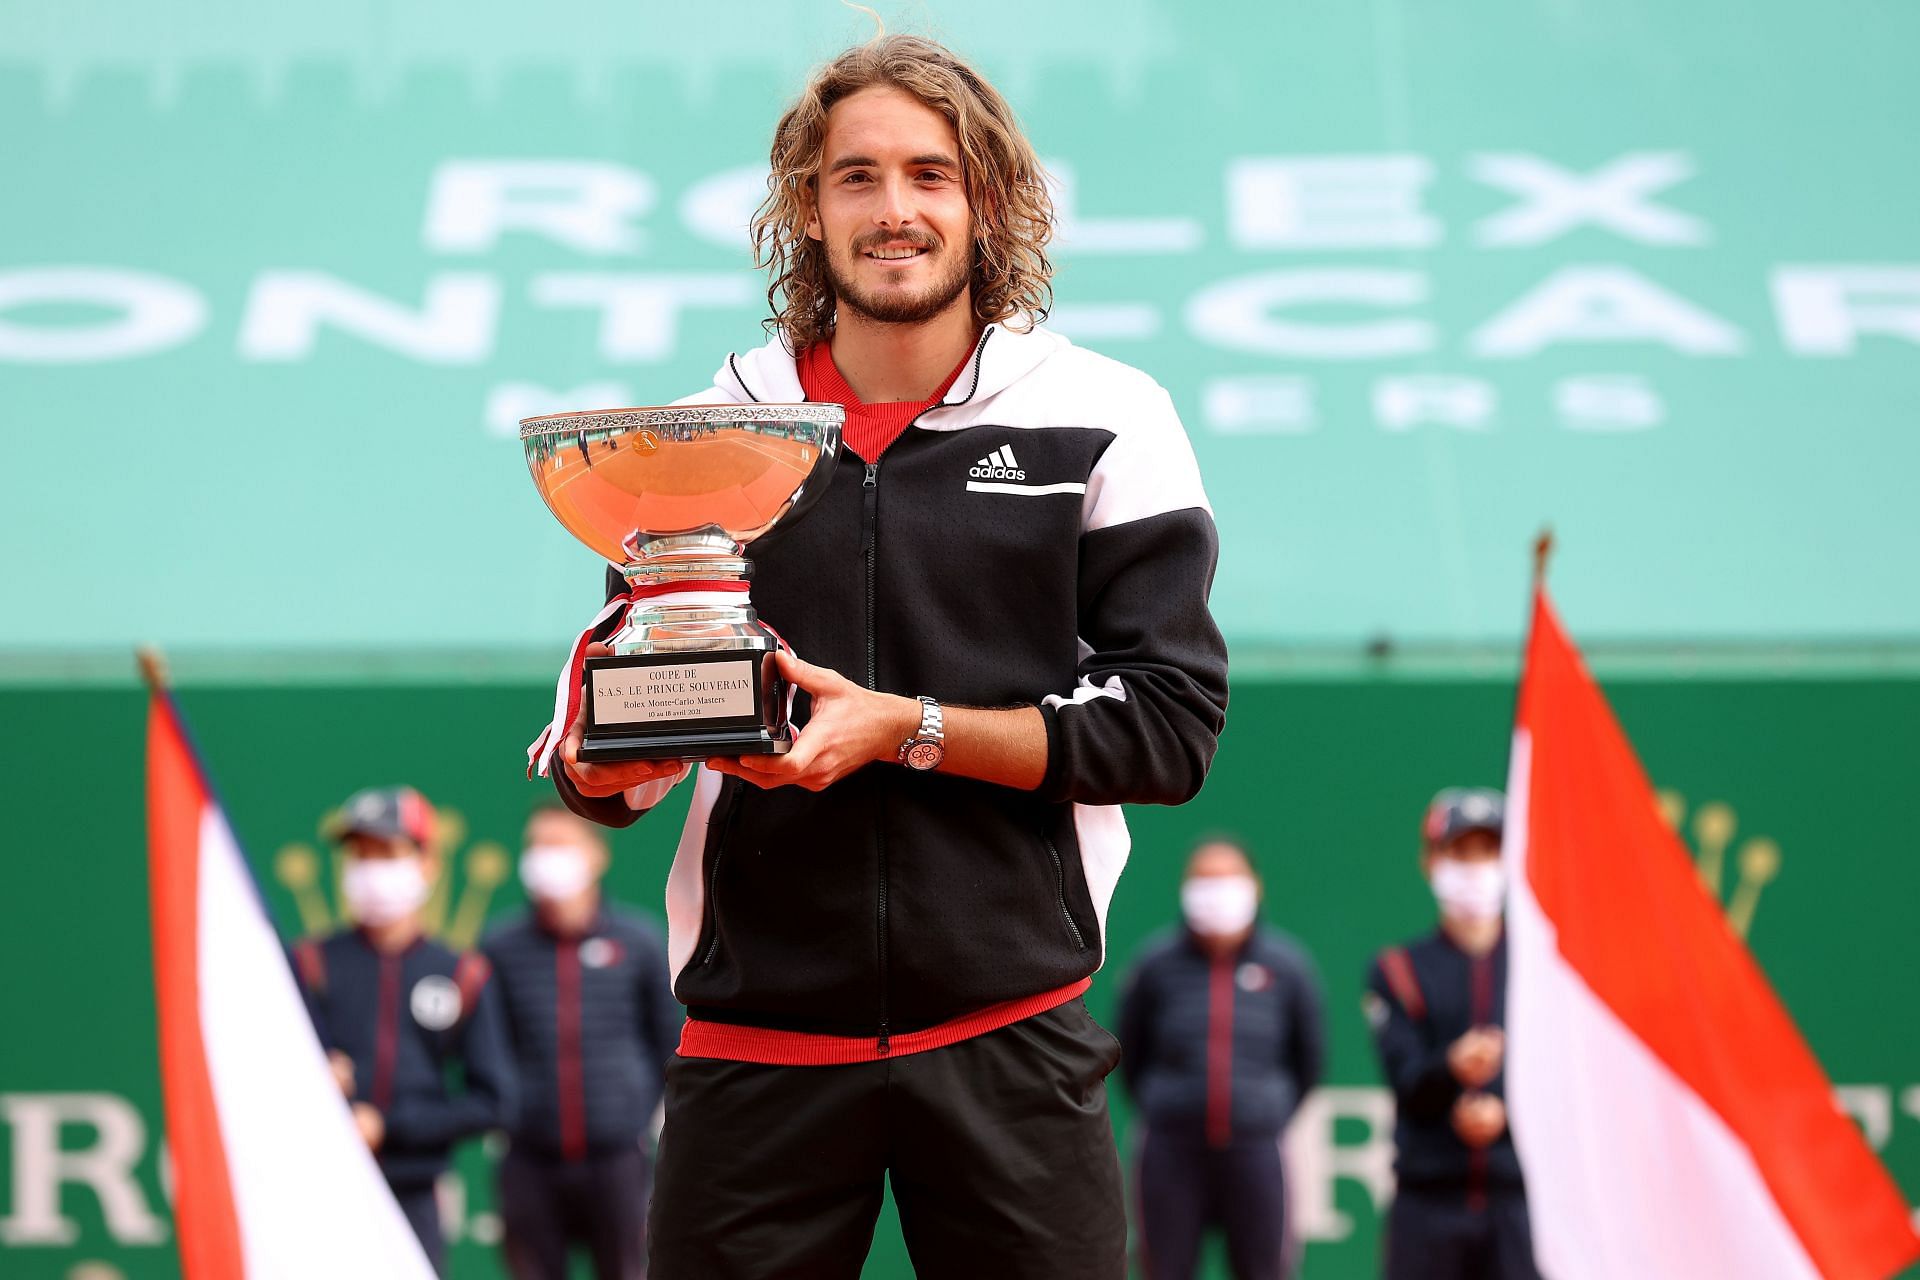 Stefanos Tsitsipas is the top seed at the 2022 Barcelona Open.